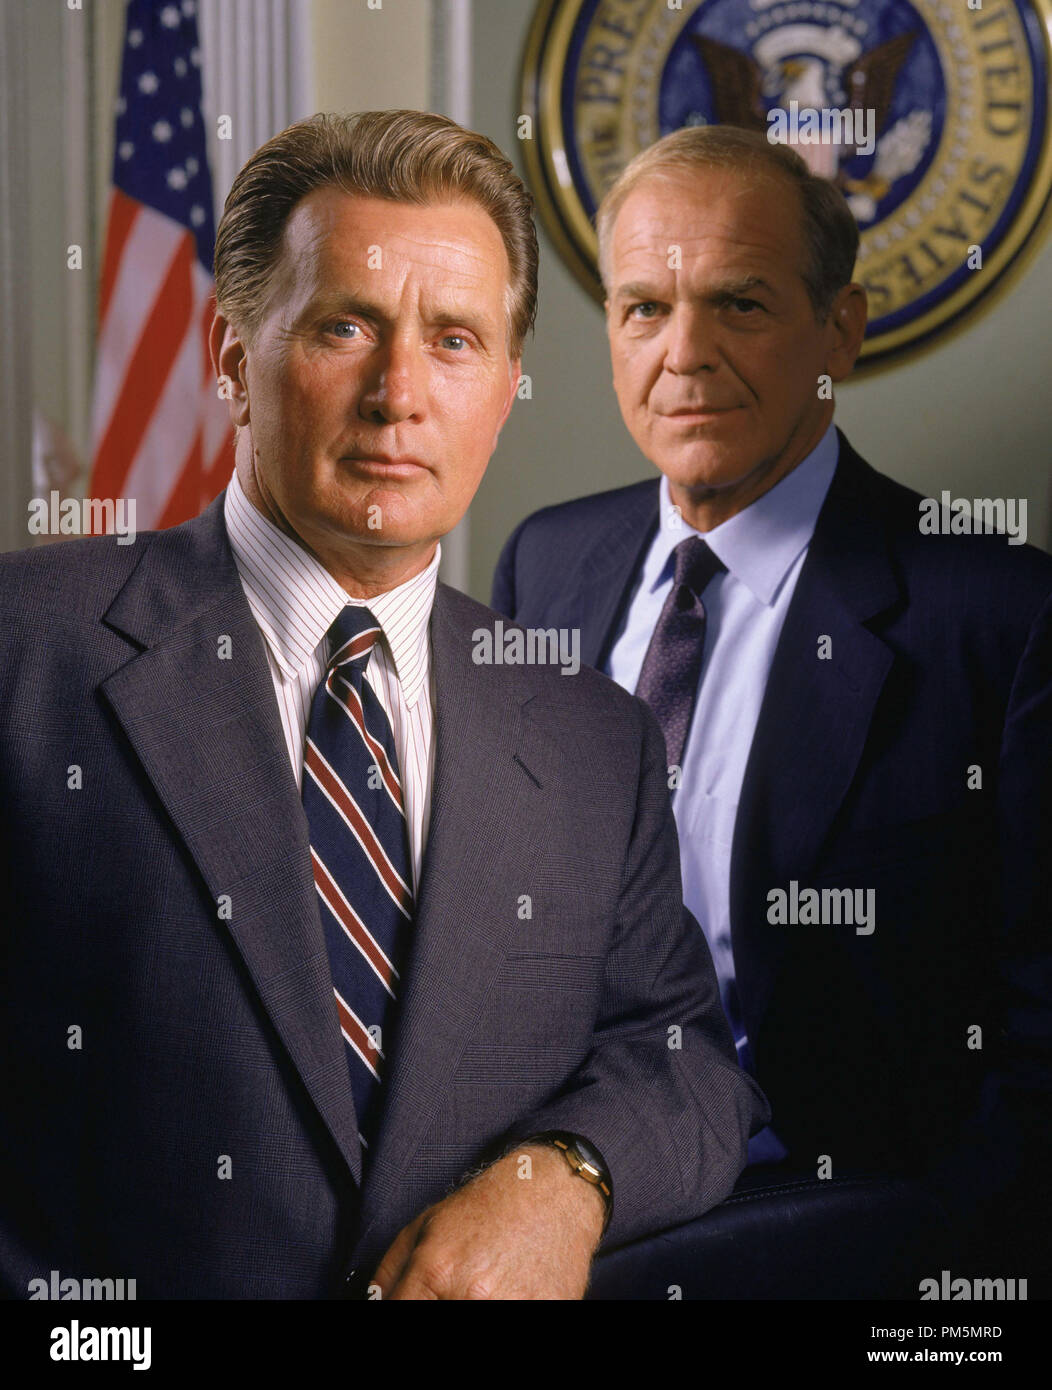 Film Still / Publicity Still from 'The West Wing' Martin Sheen, John Spencer circa 2001 Photo credit: James Sorensen File Reference # 30847106THA  For Editorial Use Only -  All Rights Reserved Stock Photo